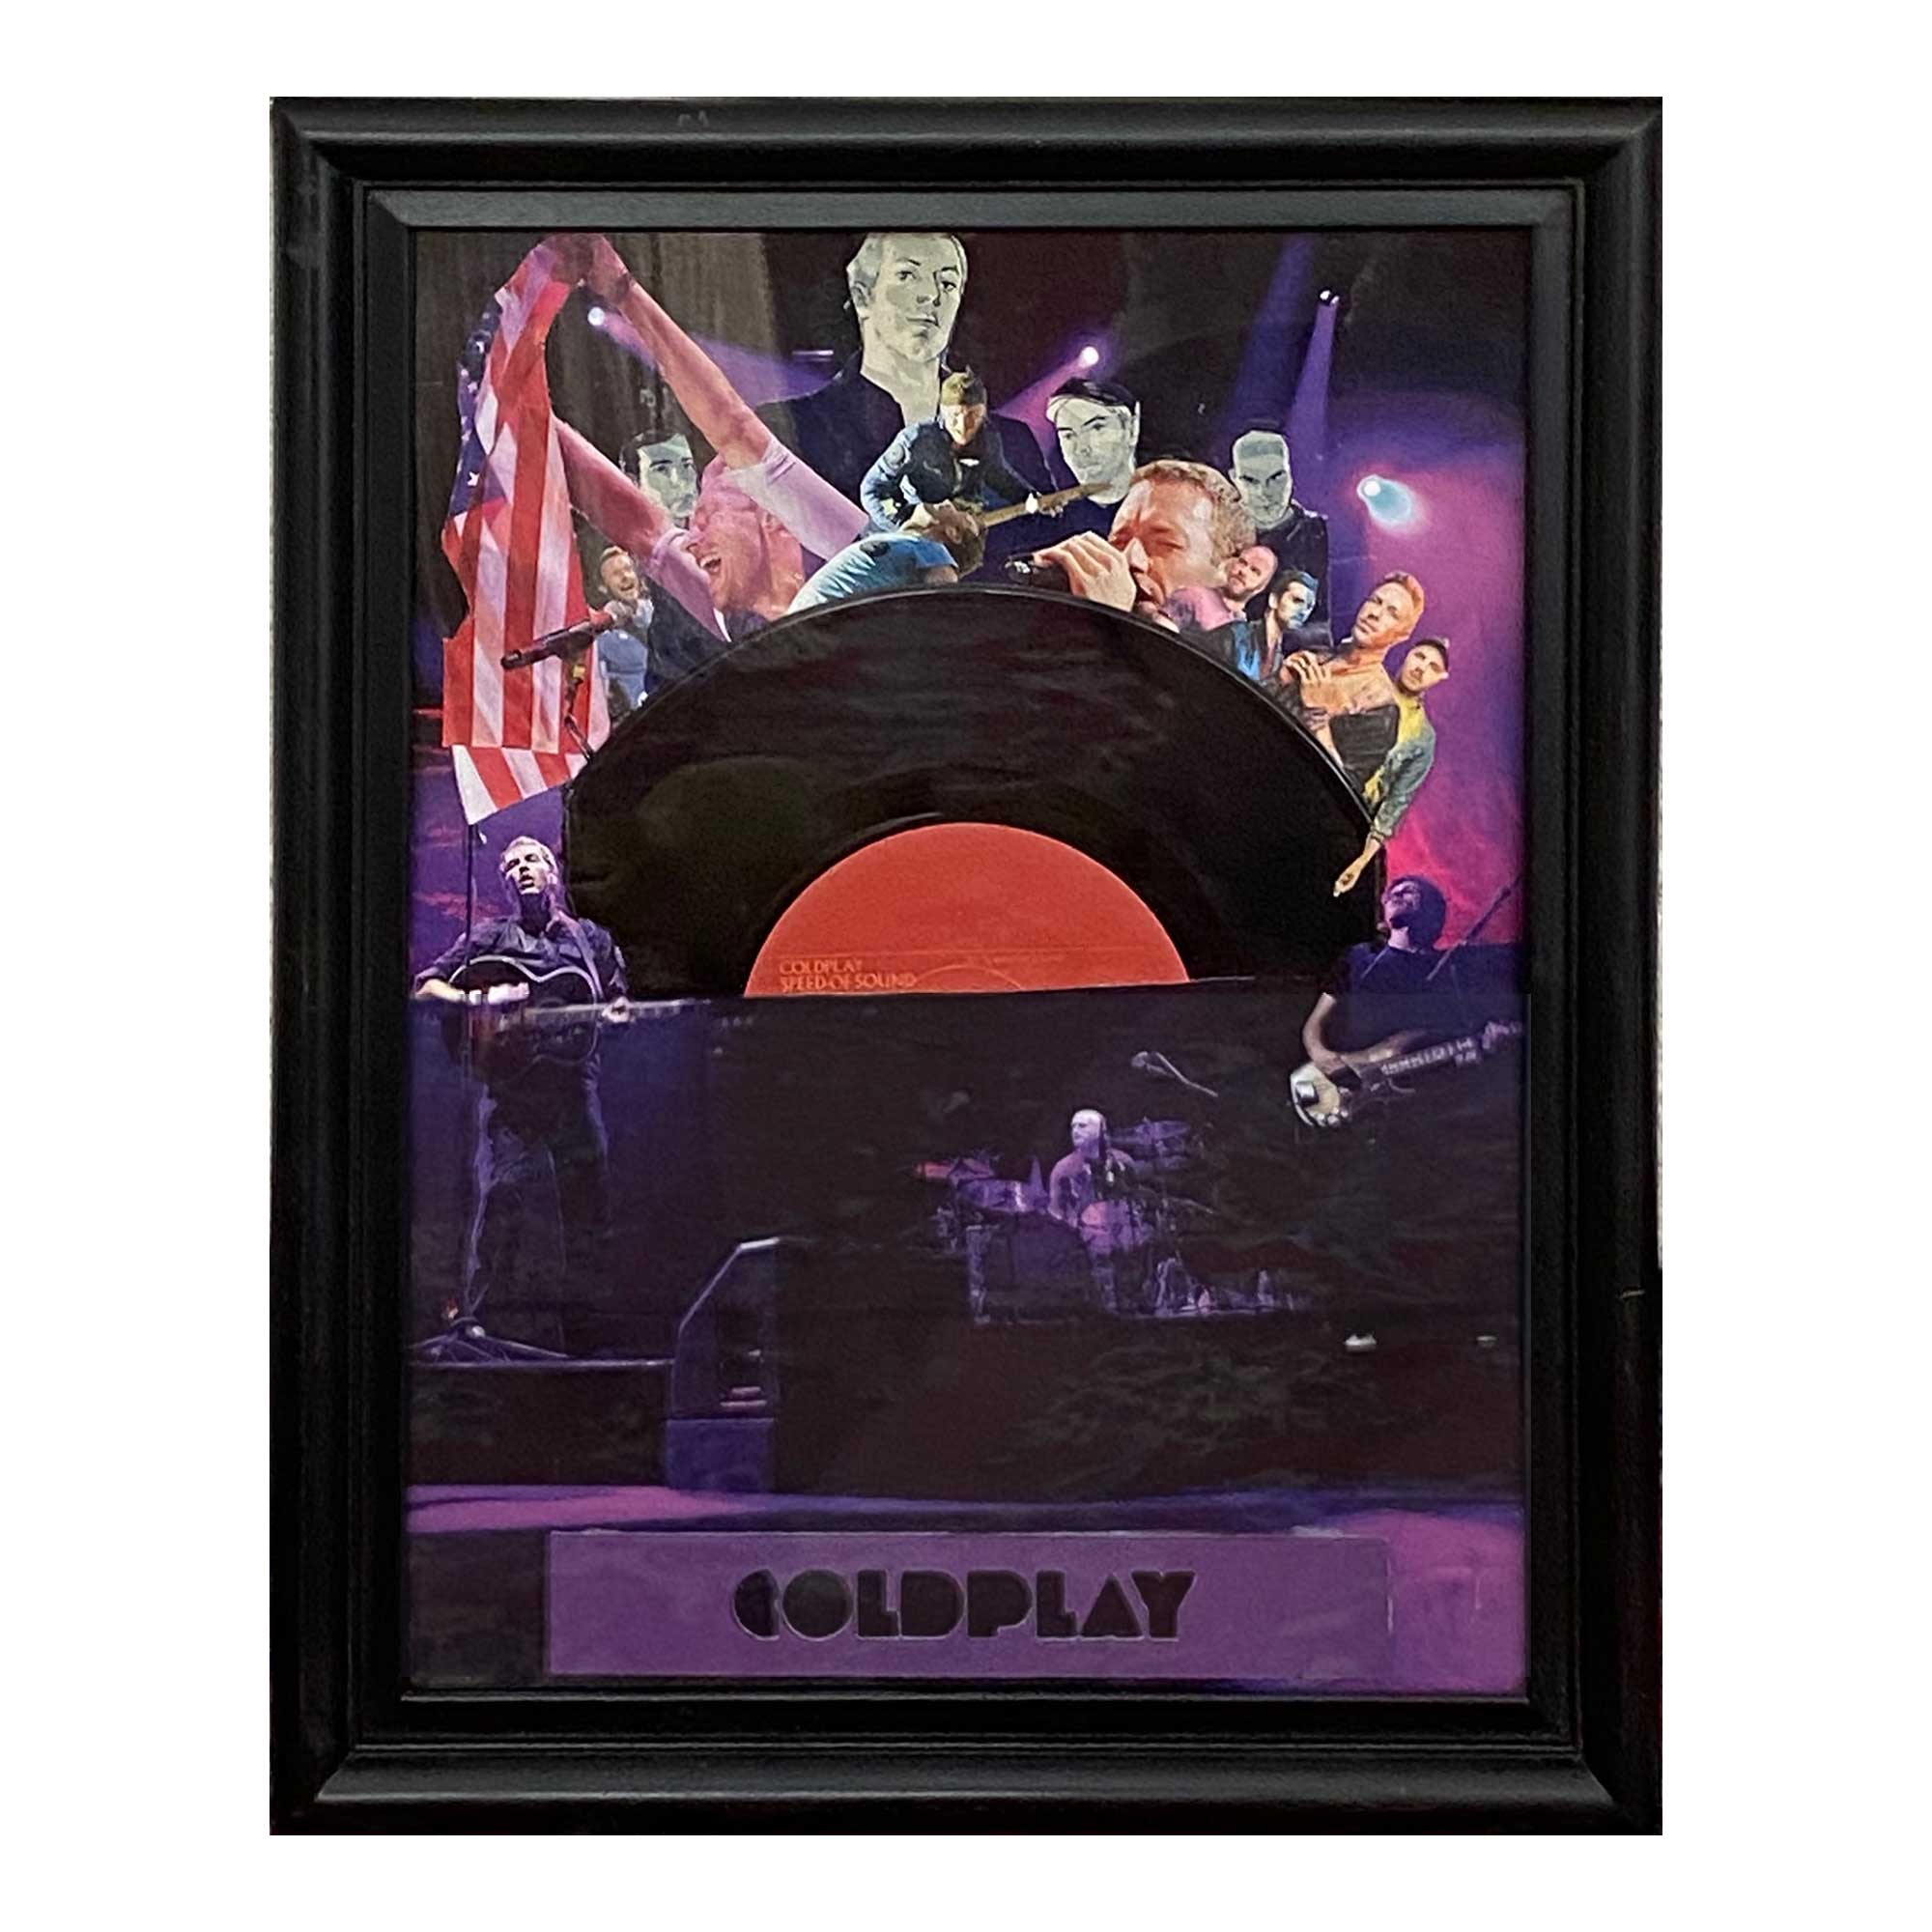 Coldplay Speed of Sound Framed Vinyl Record & Collage – Rock N Sport Store